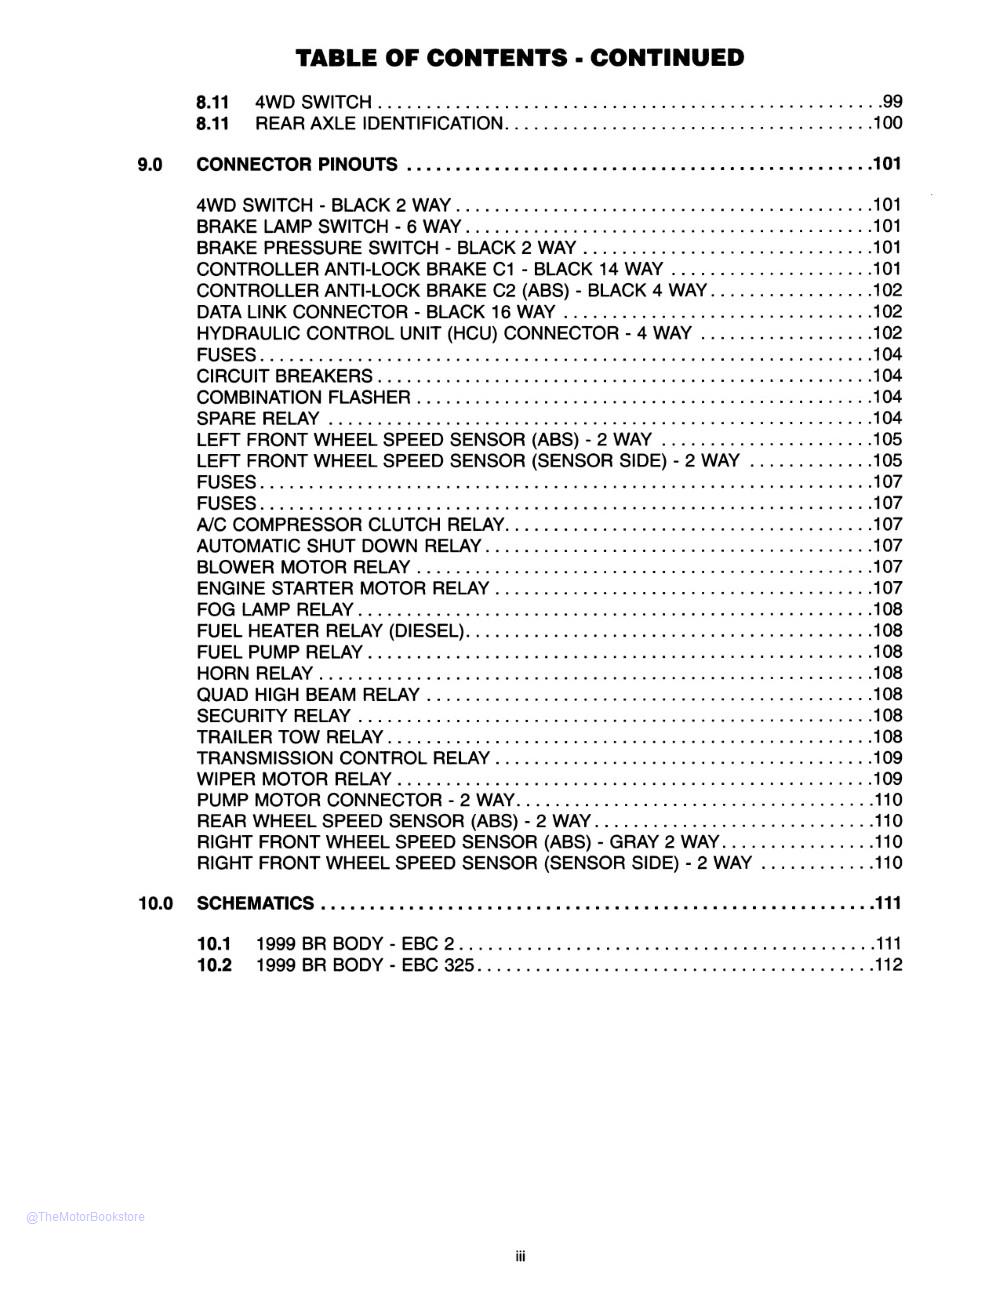 1999 Dodge Ram Truck Chassis Diagnostic Manual Supplement  - Table of Contents 3